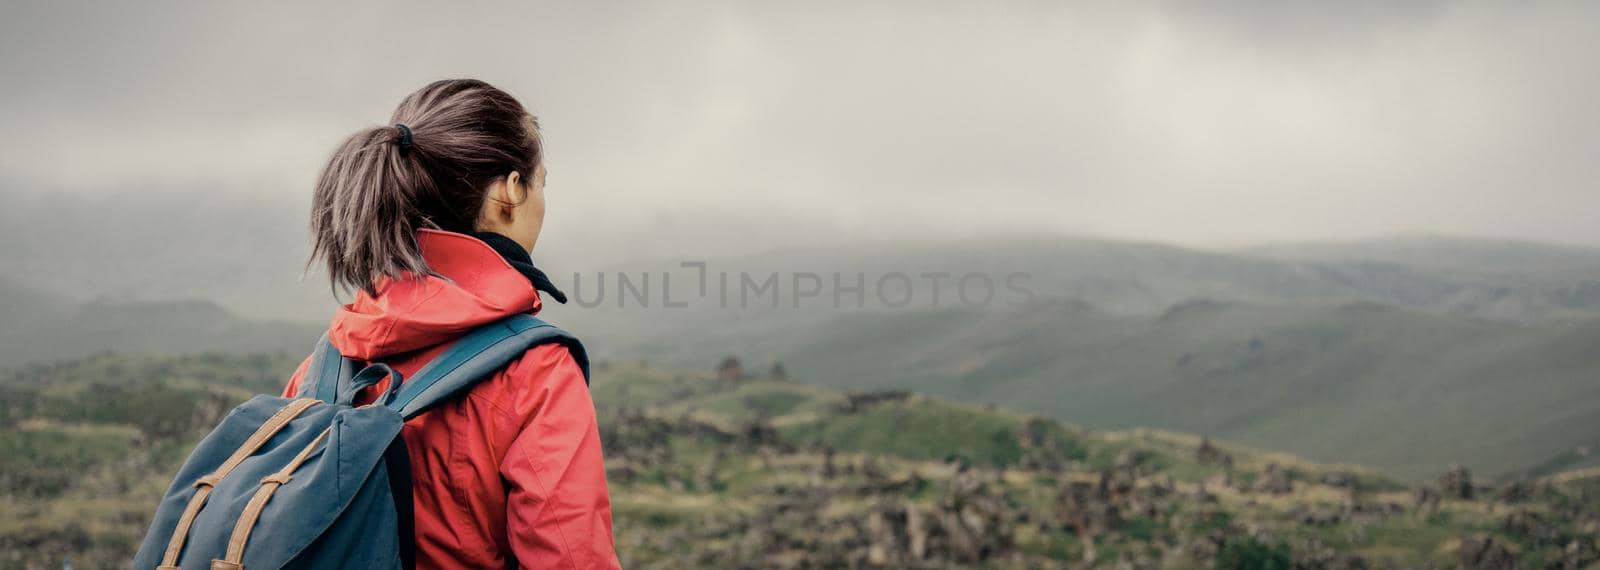 Explorer young woman with backpack walking in summer mountains in rainy weather.